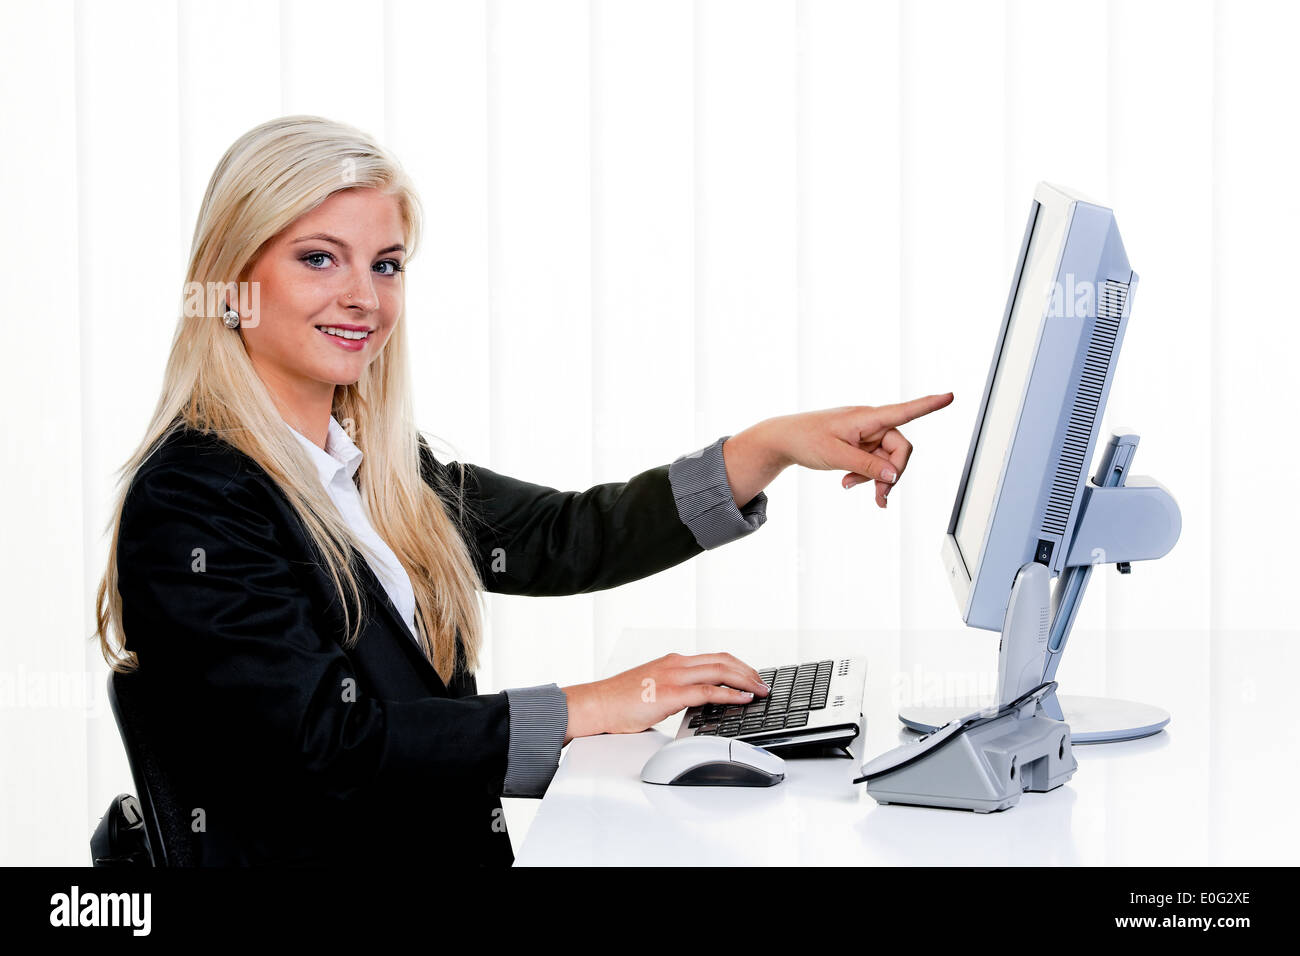 Young woman with computer in the office., Junge Frau mit Computer im Buero. Stock Photo